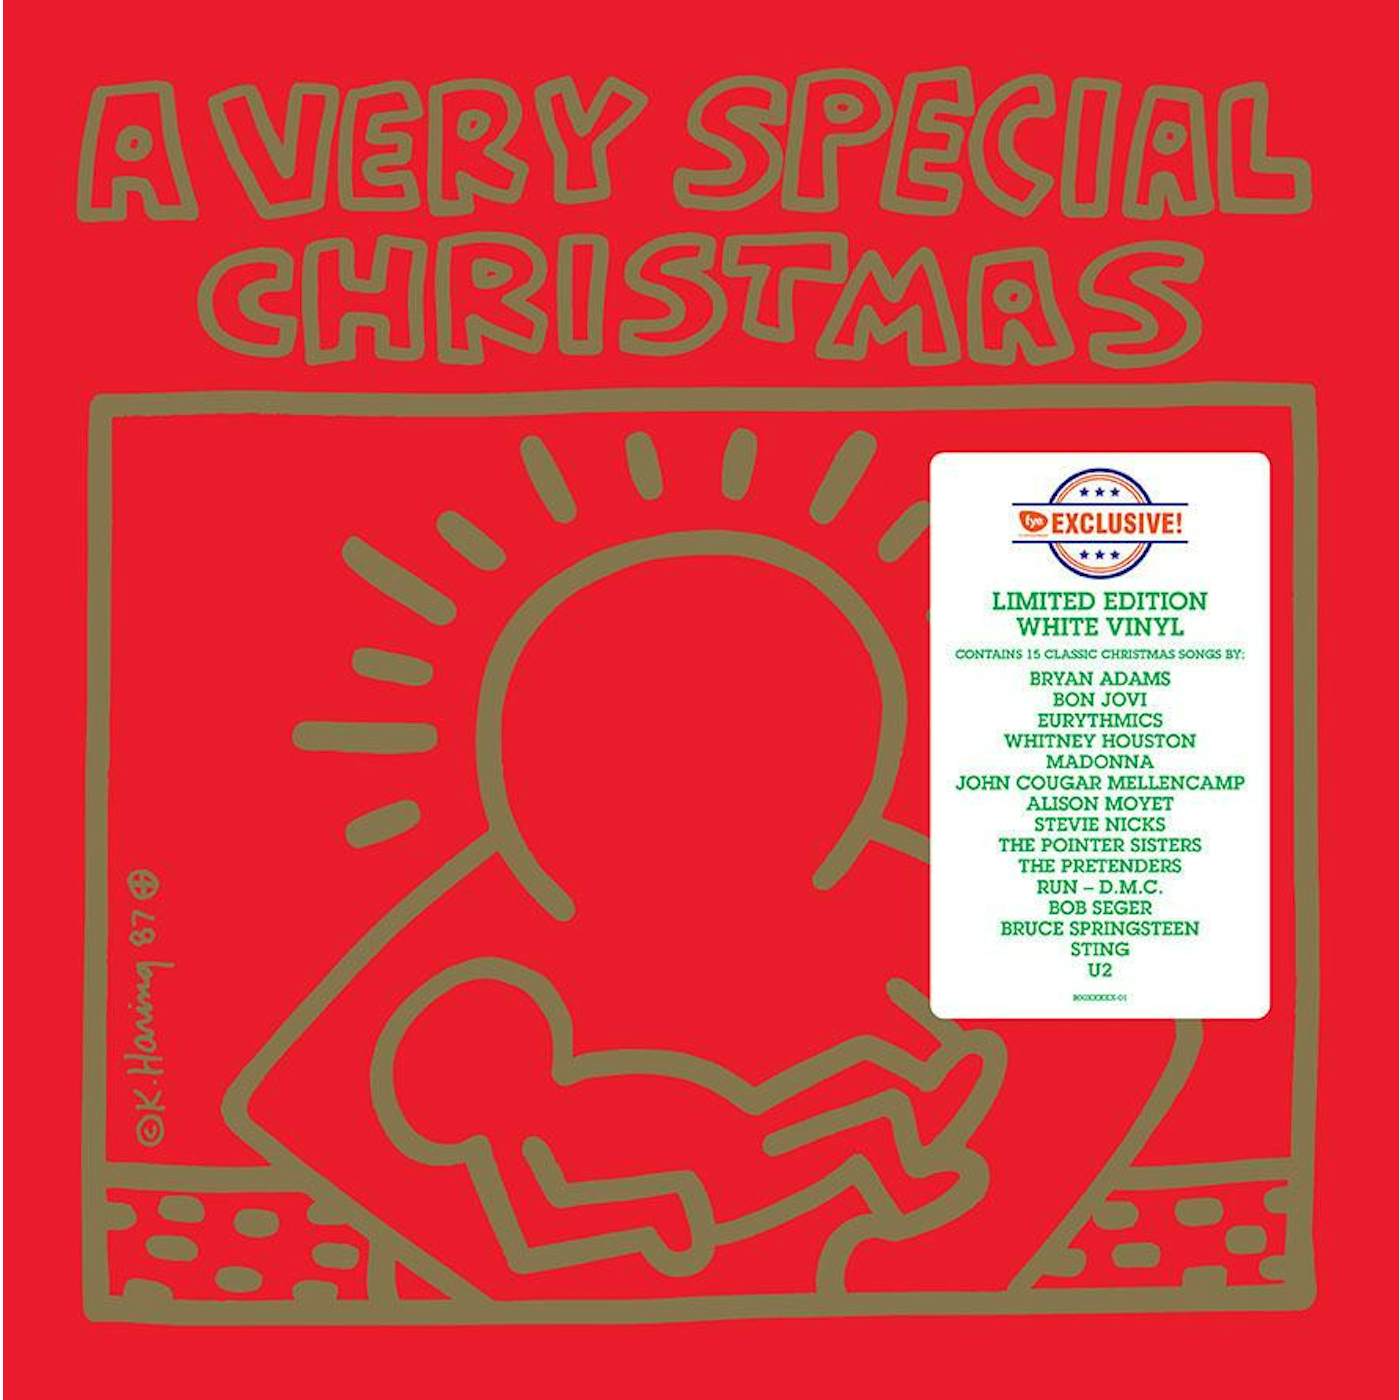 VERY SPECIAL CHRISTMAS / VARIOUS A Very Special Christmas Vol 1 [Exclusive White Vinyl]